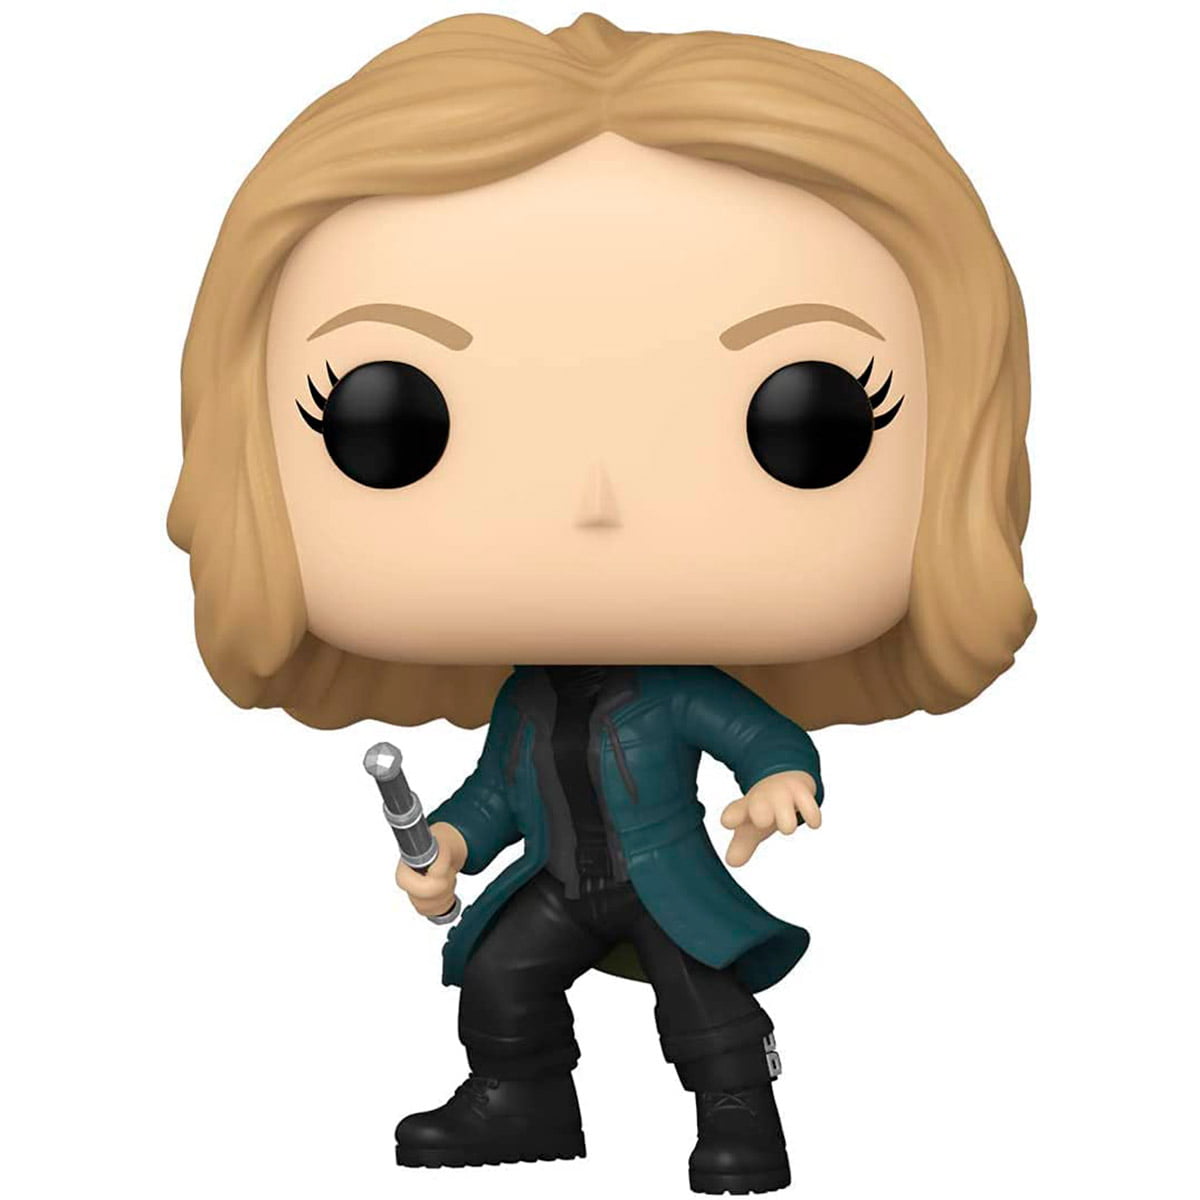 Funko Pop Sharon Carter 816 The Falcon and Winter Soldier